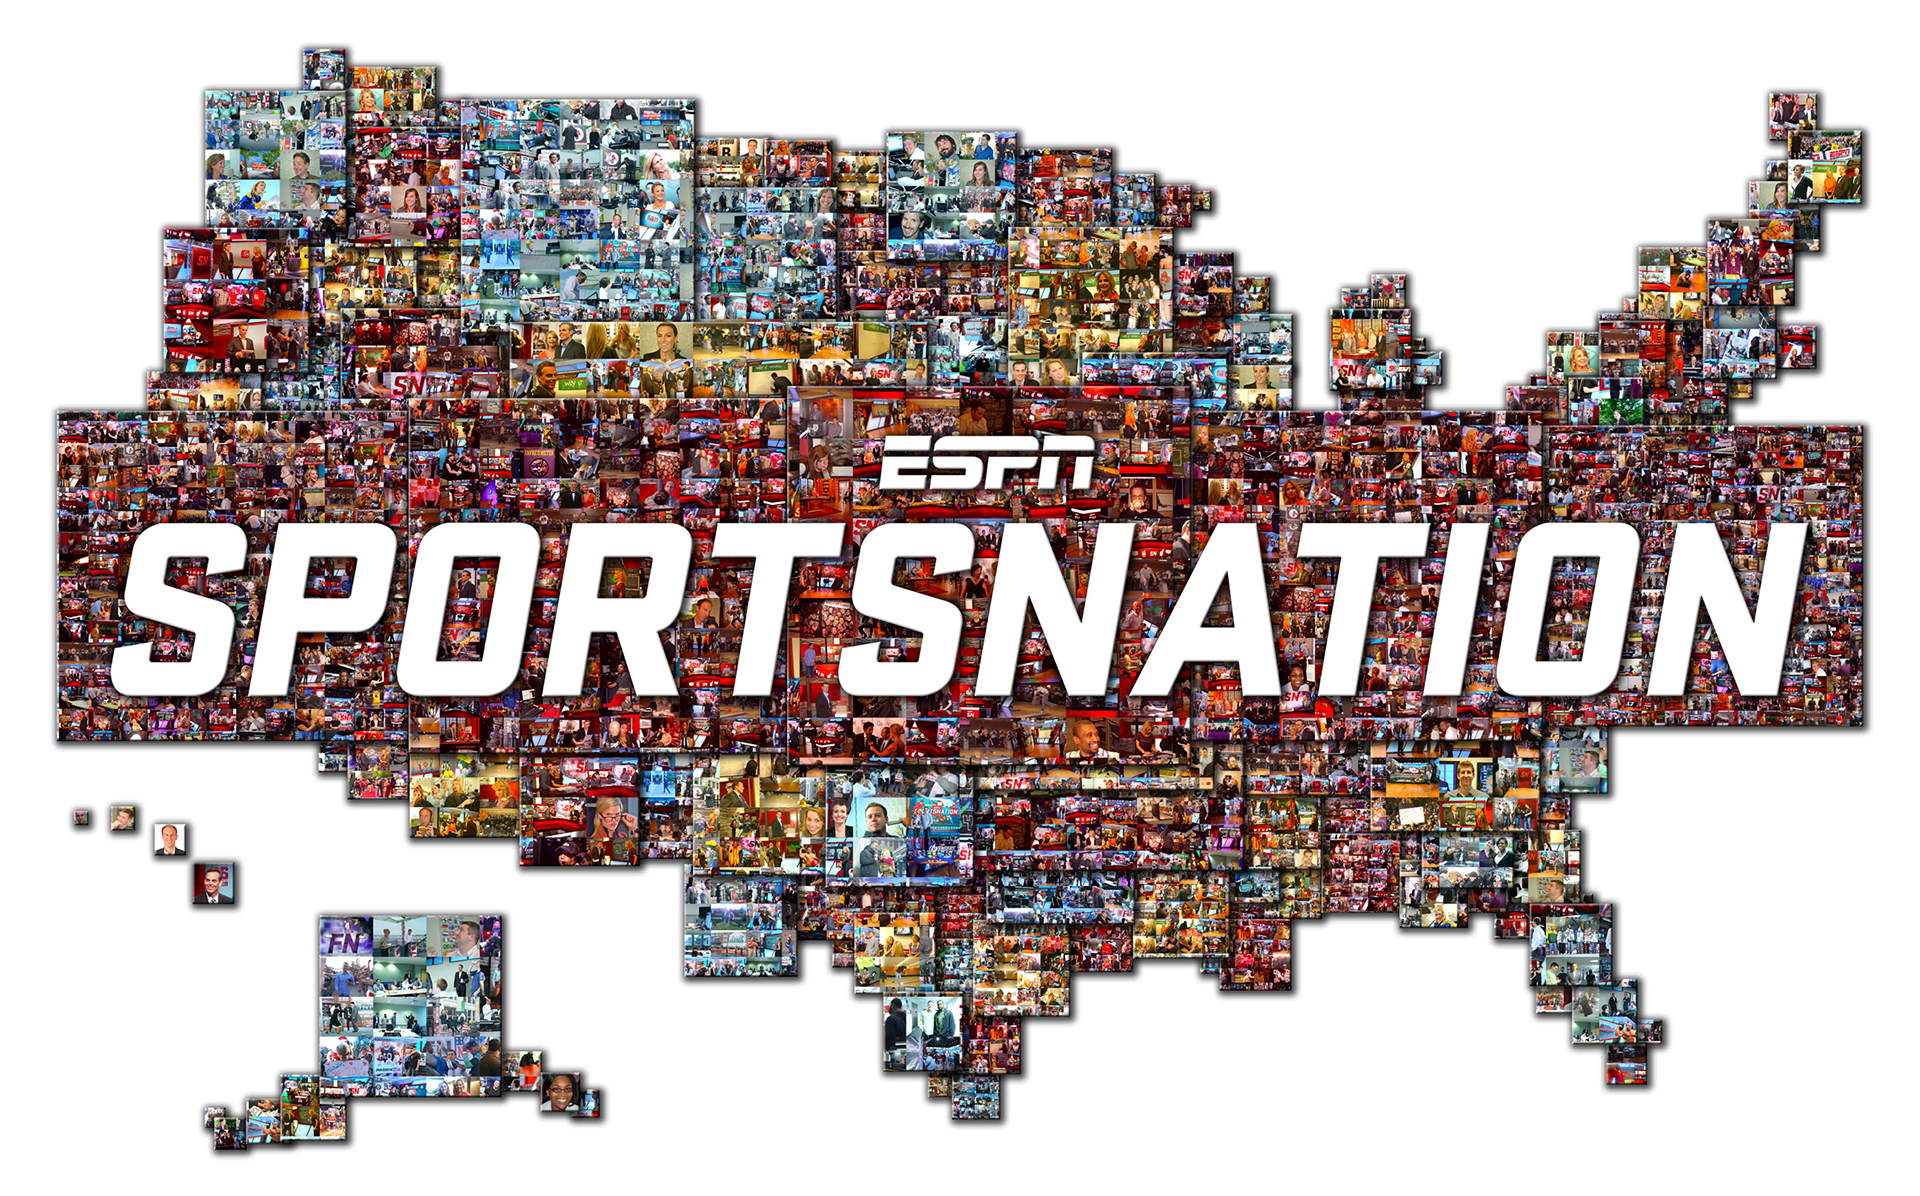 photo mosaic created using over 1200 photos of cast and crew of Sportsnation